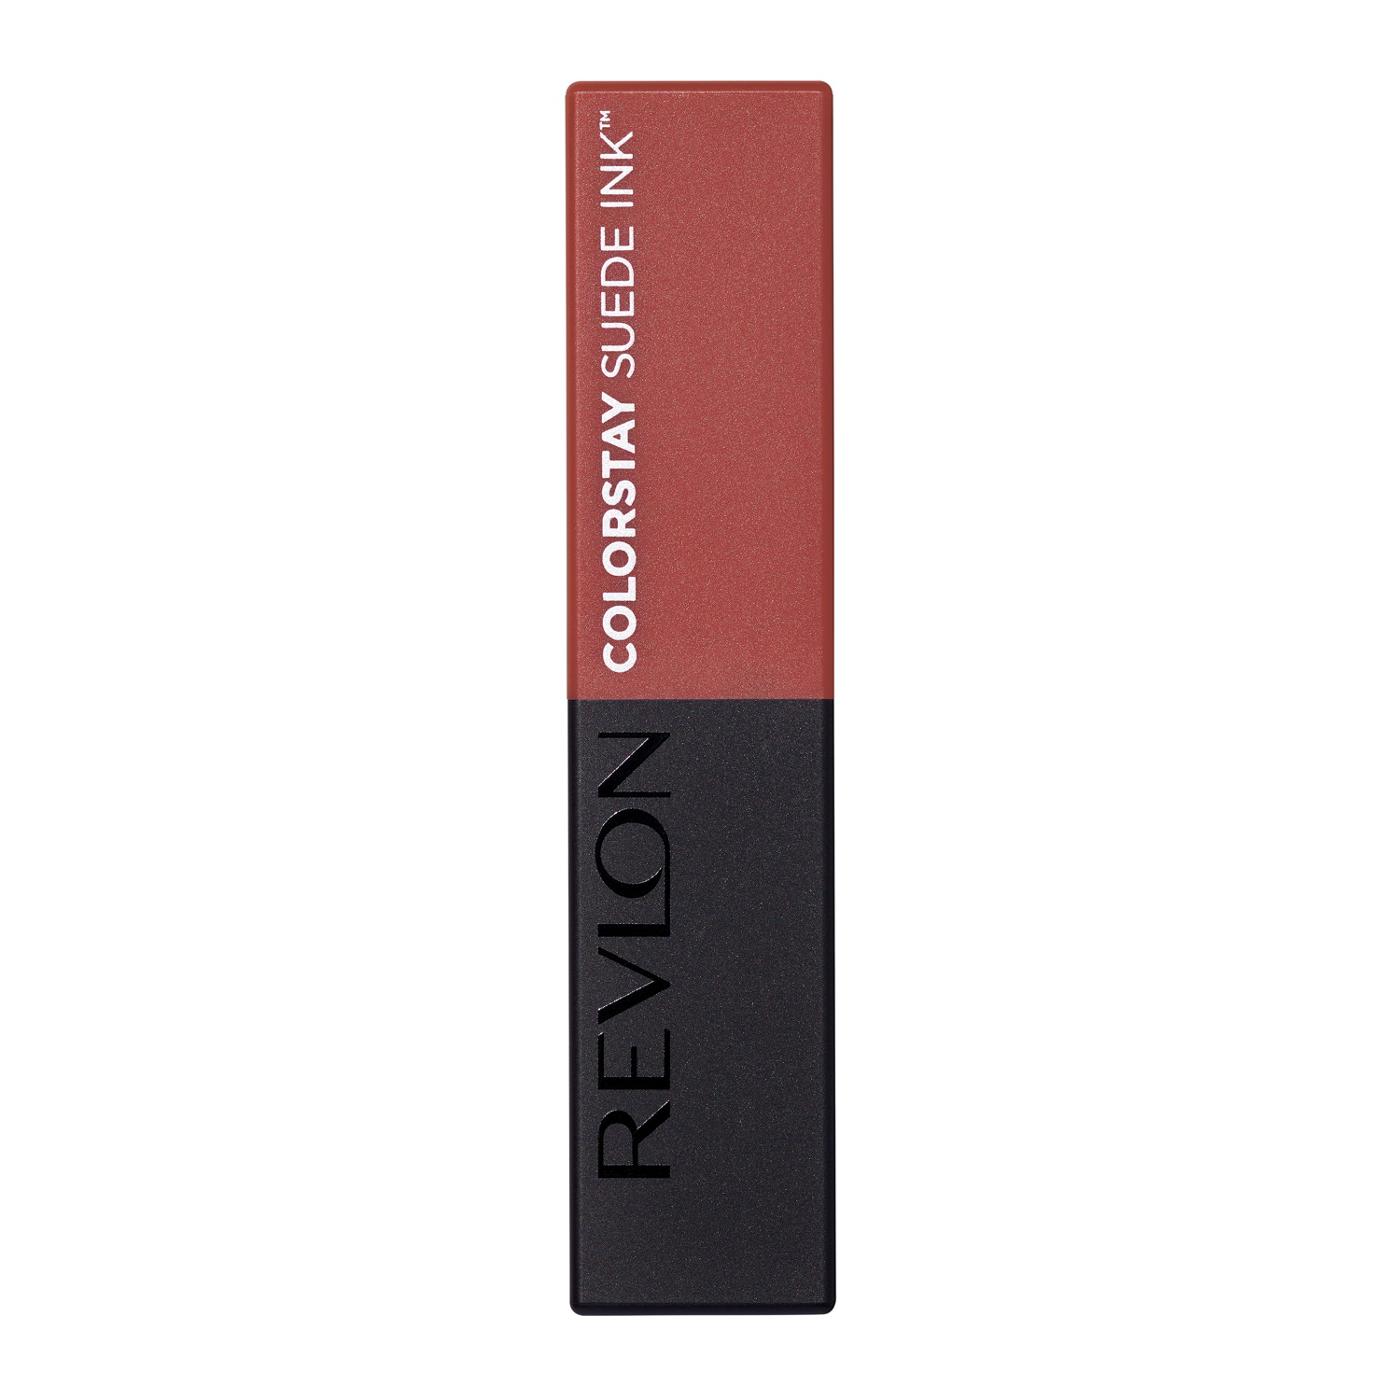 Revlon ColorStay Suede Ink Lipstick - Want It All; image 1 of 5